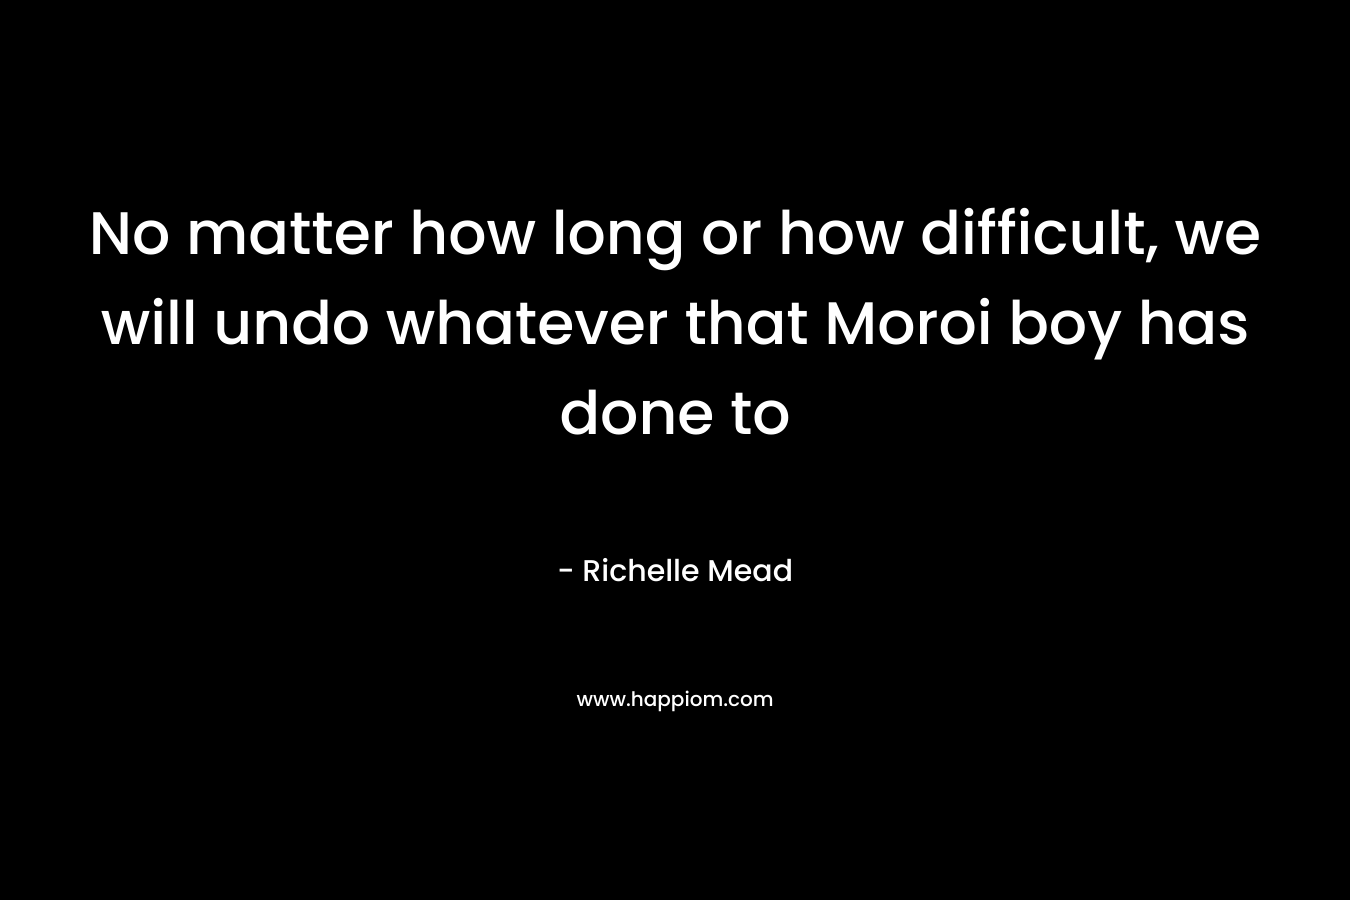 No matter how long or how difficult, we will undo whatever that Moroi boy has done to